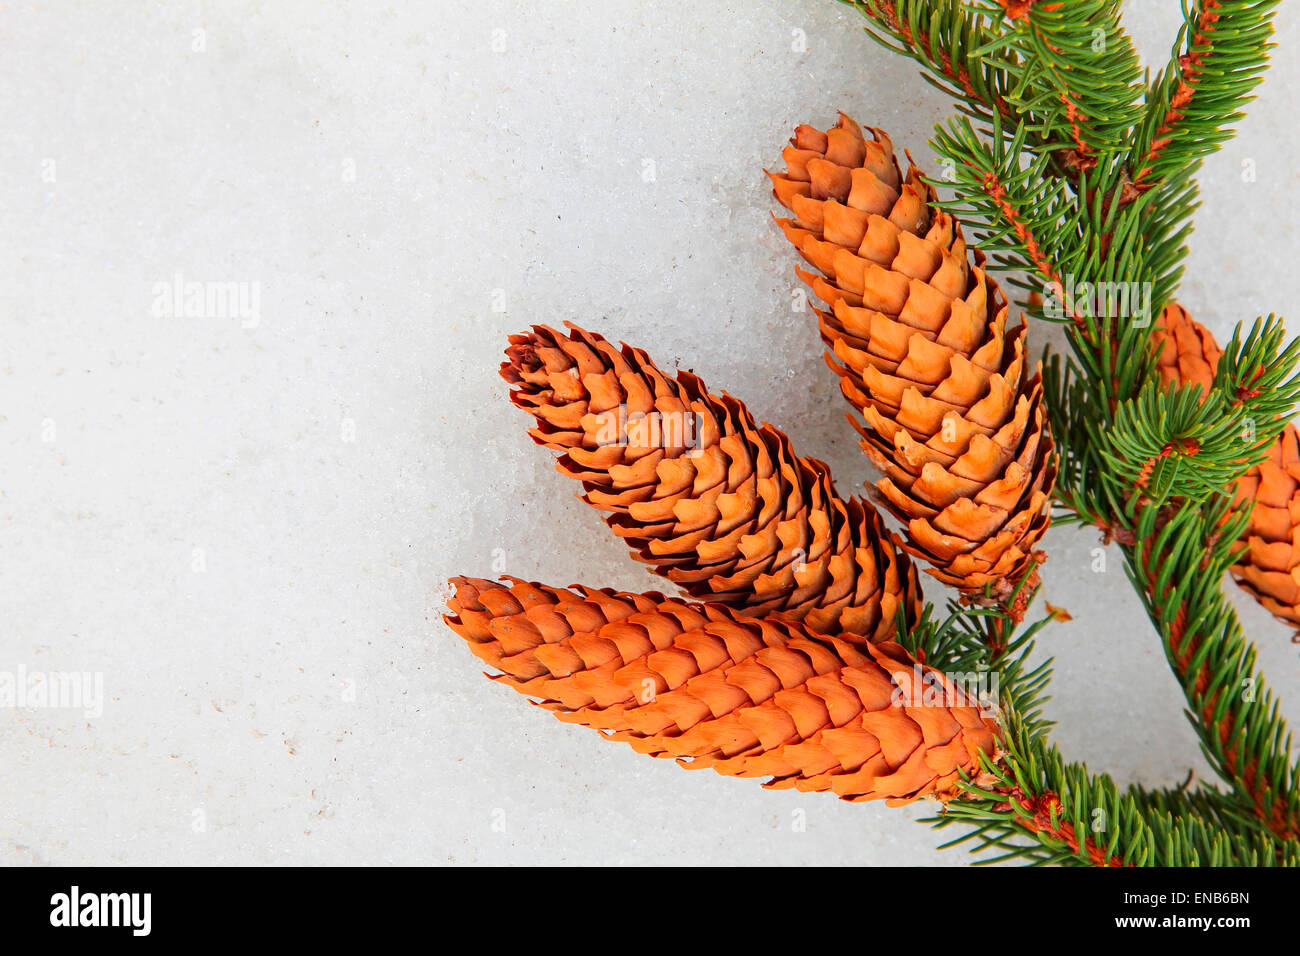 Pine branch and fir cones on white snow. Stock Photo